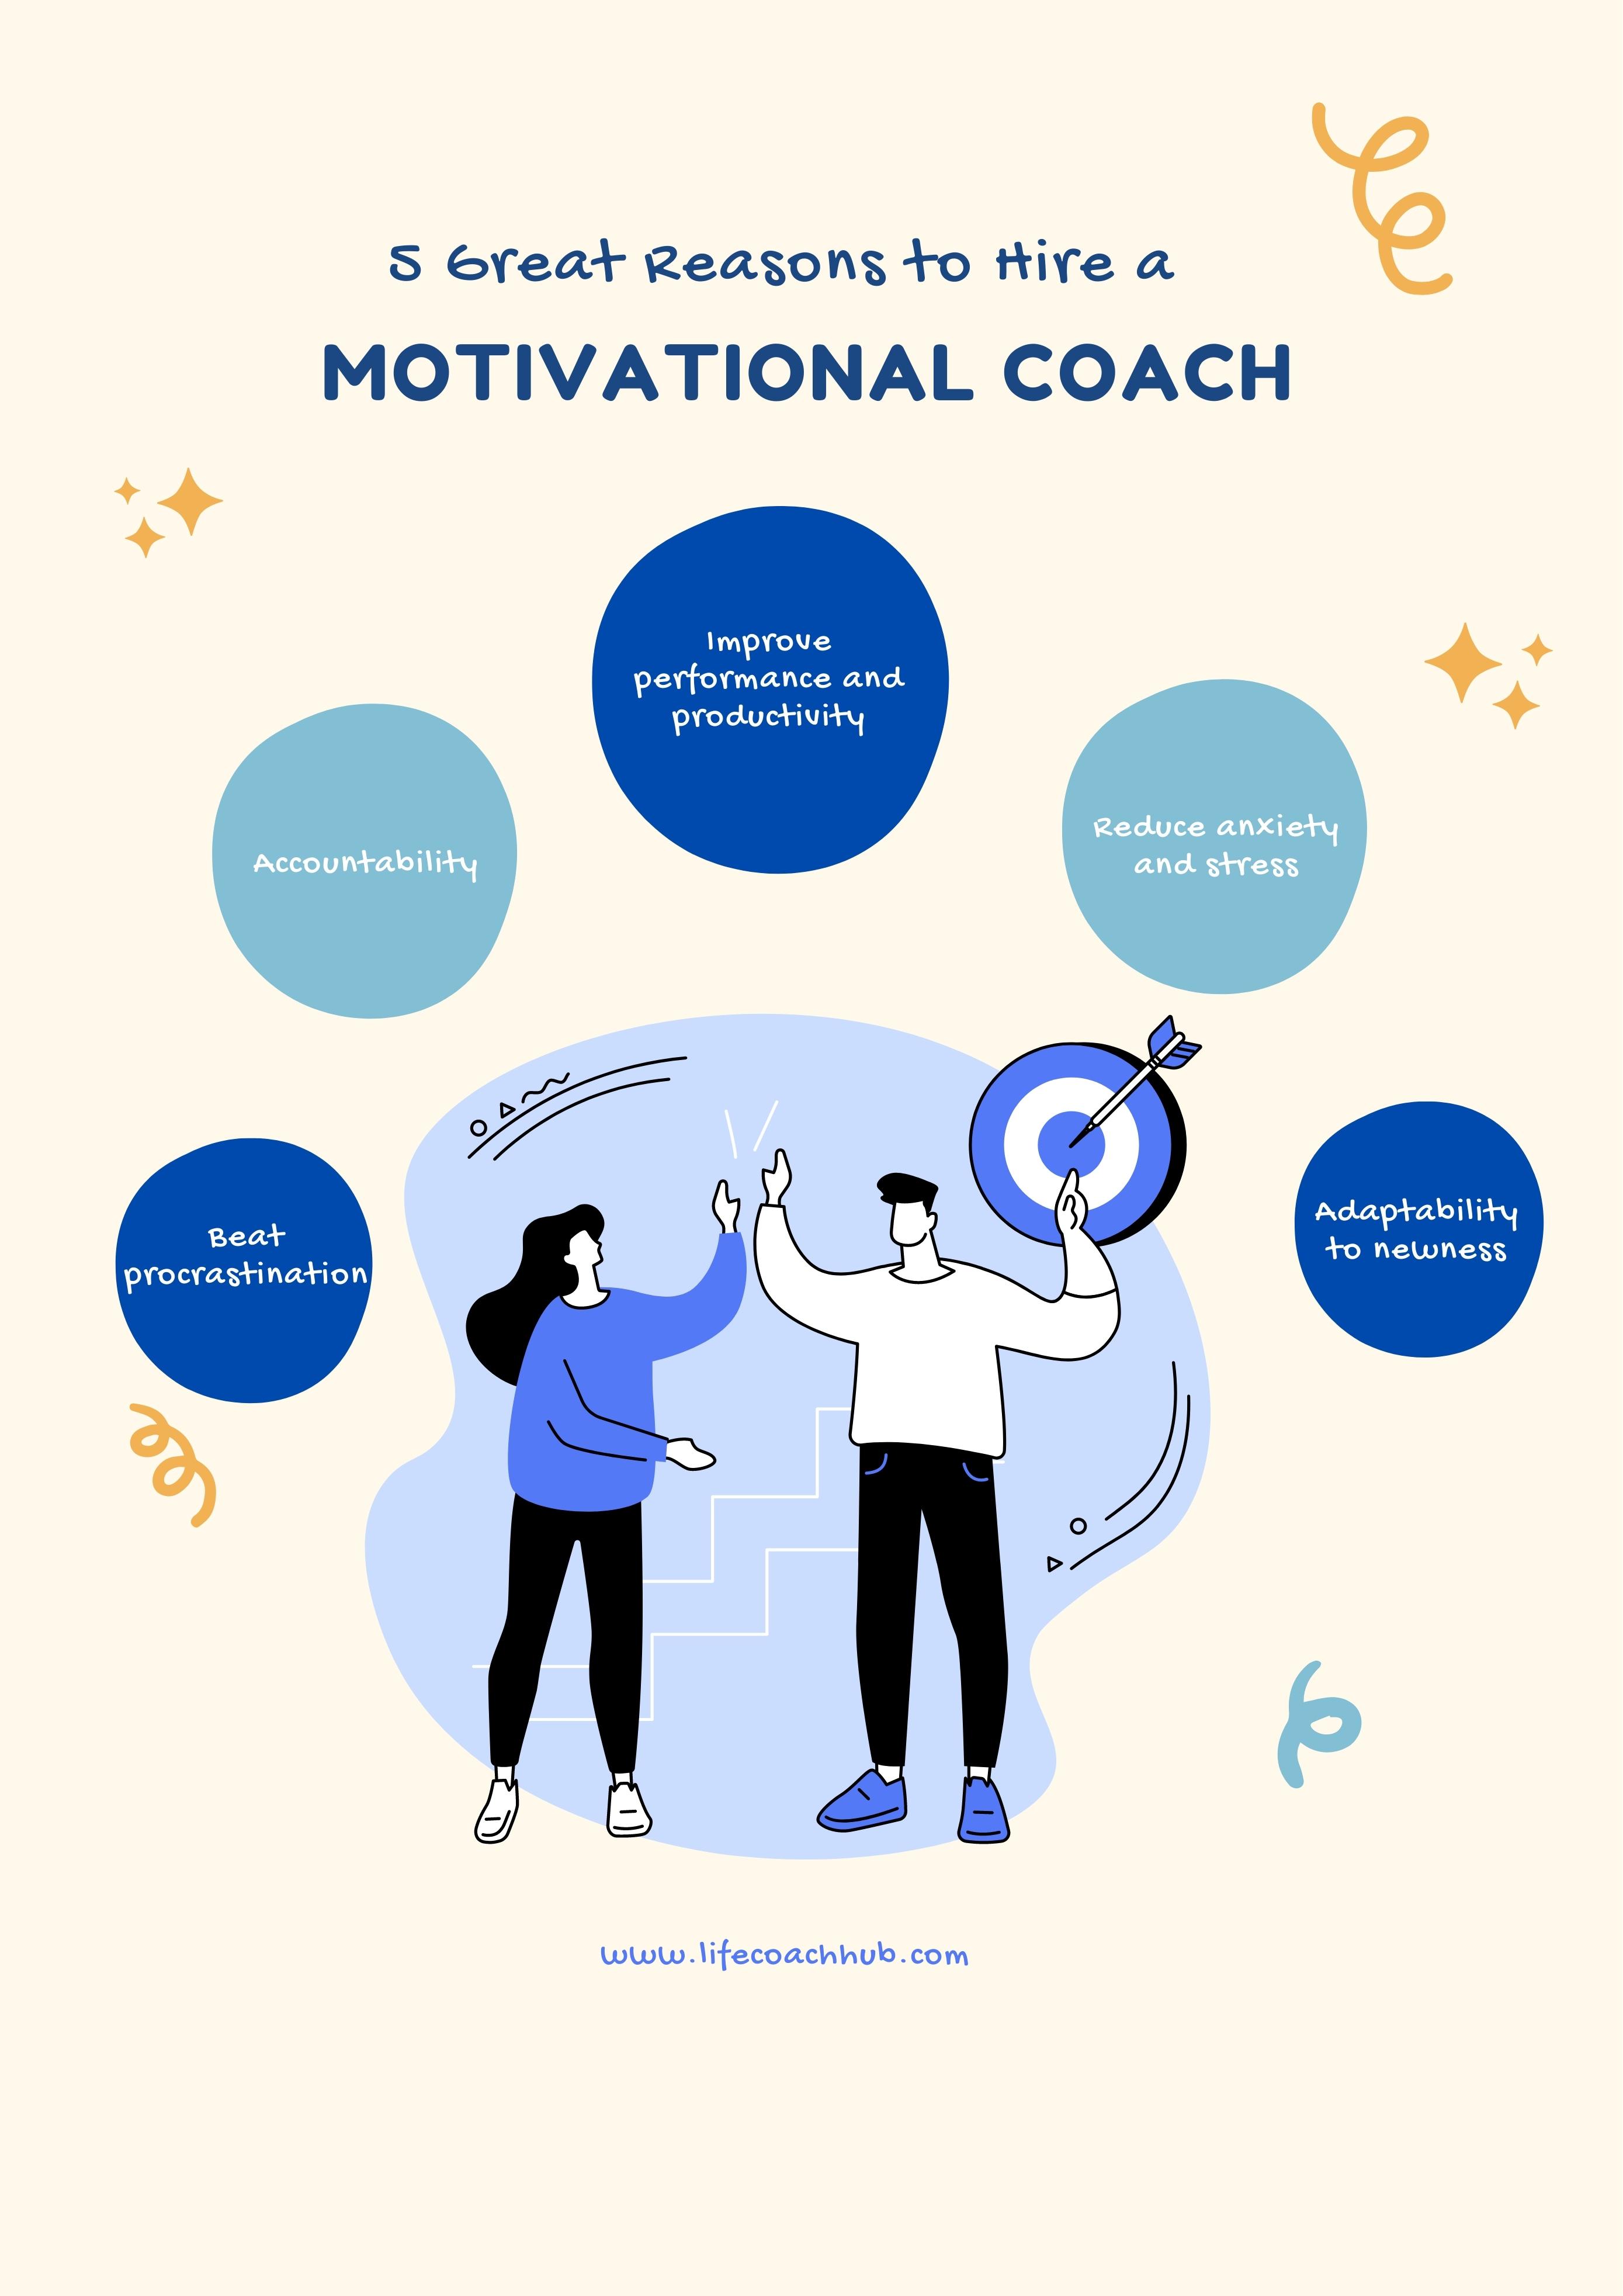 5 Great Reasons to Hire a Motivational Coach